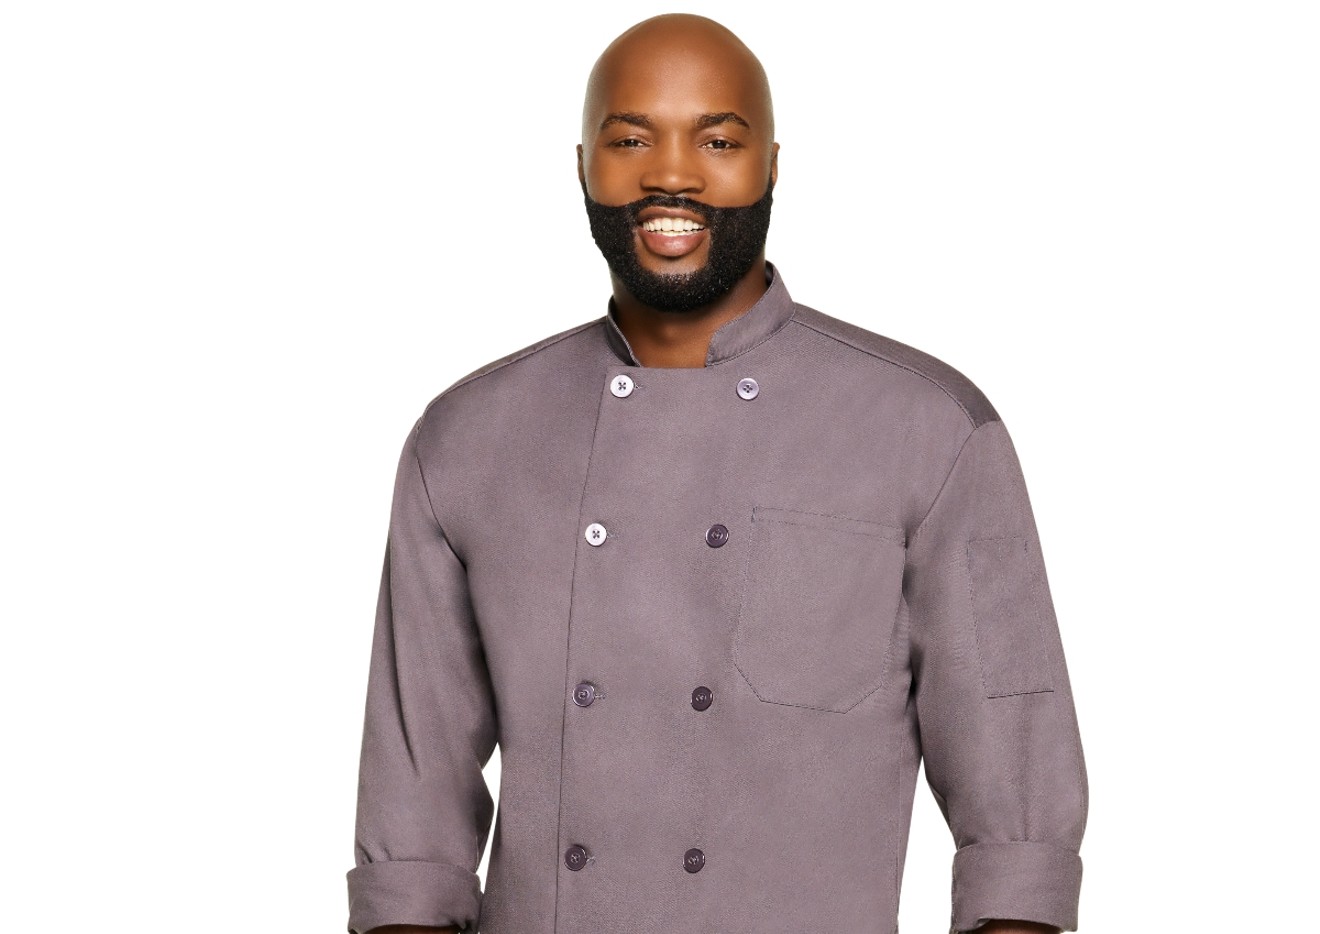 Chef Lawrence Page